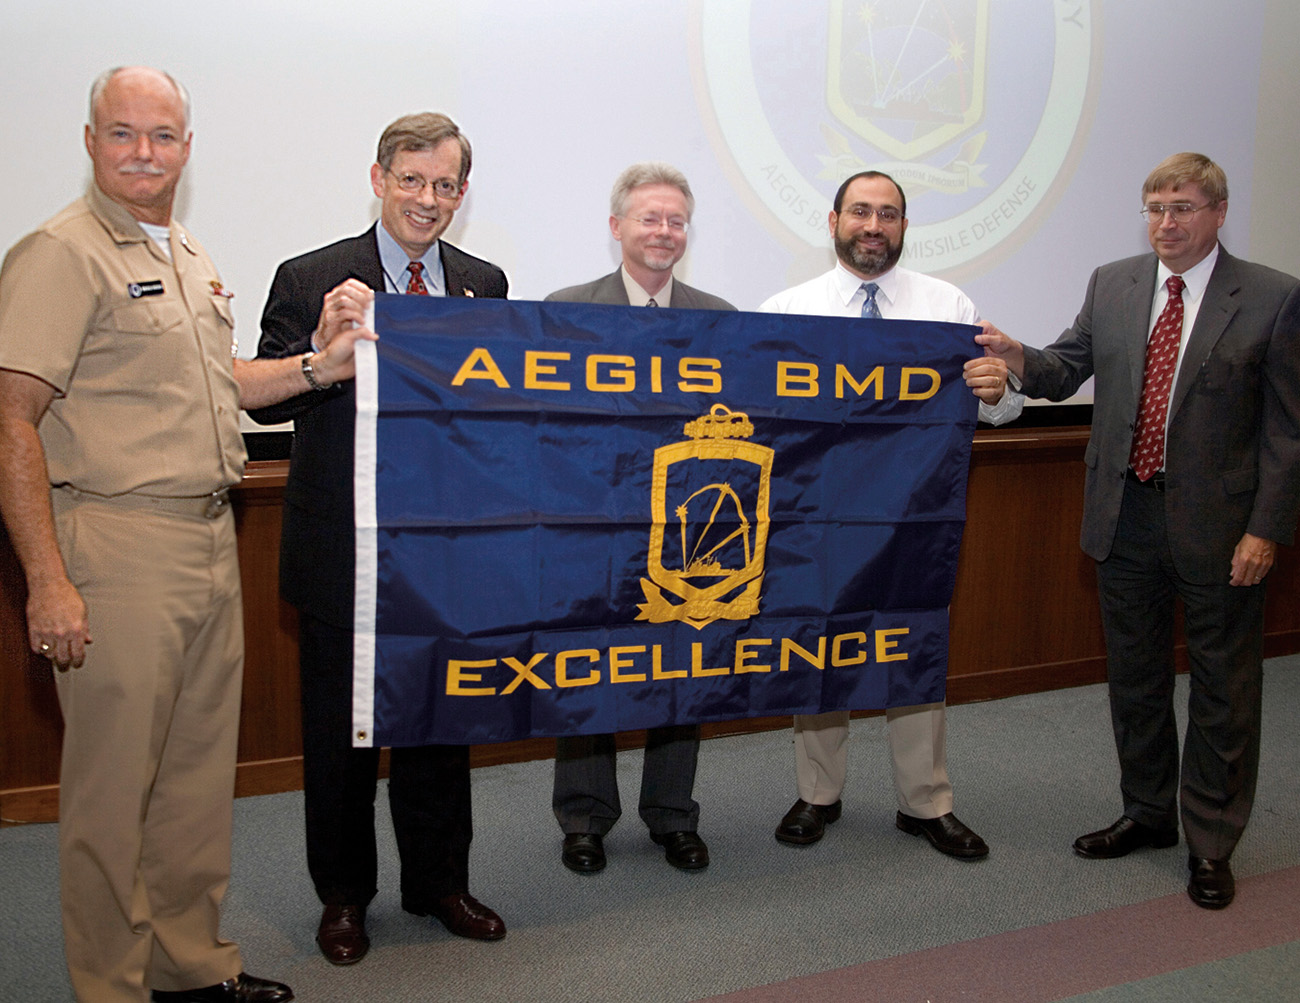 Aegis Ballistic Missile Defense Program Director Rear Adm. Alan Hicks (far left) and Executive Director Larry Rogers (far right) present the flag to APL Director Rich Roca, APL Aegis BMD Program Manager Joel Miller, and Test and Evaluation Project Manager Joe Mulé 